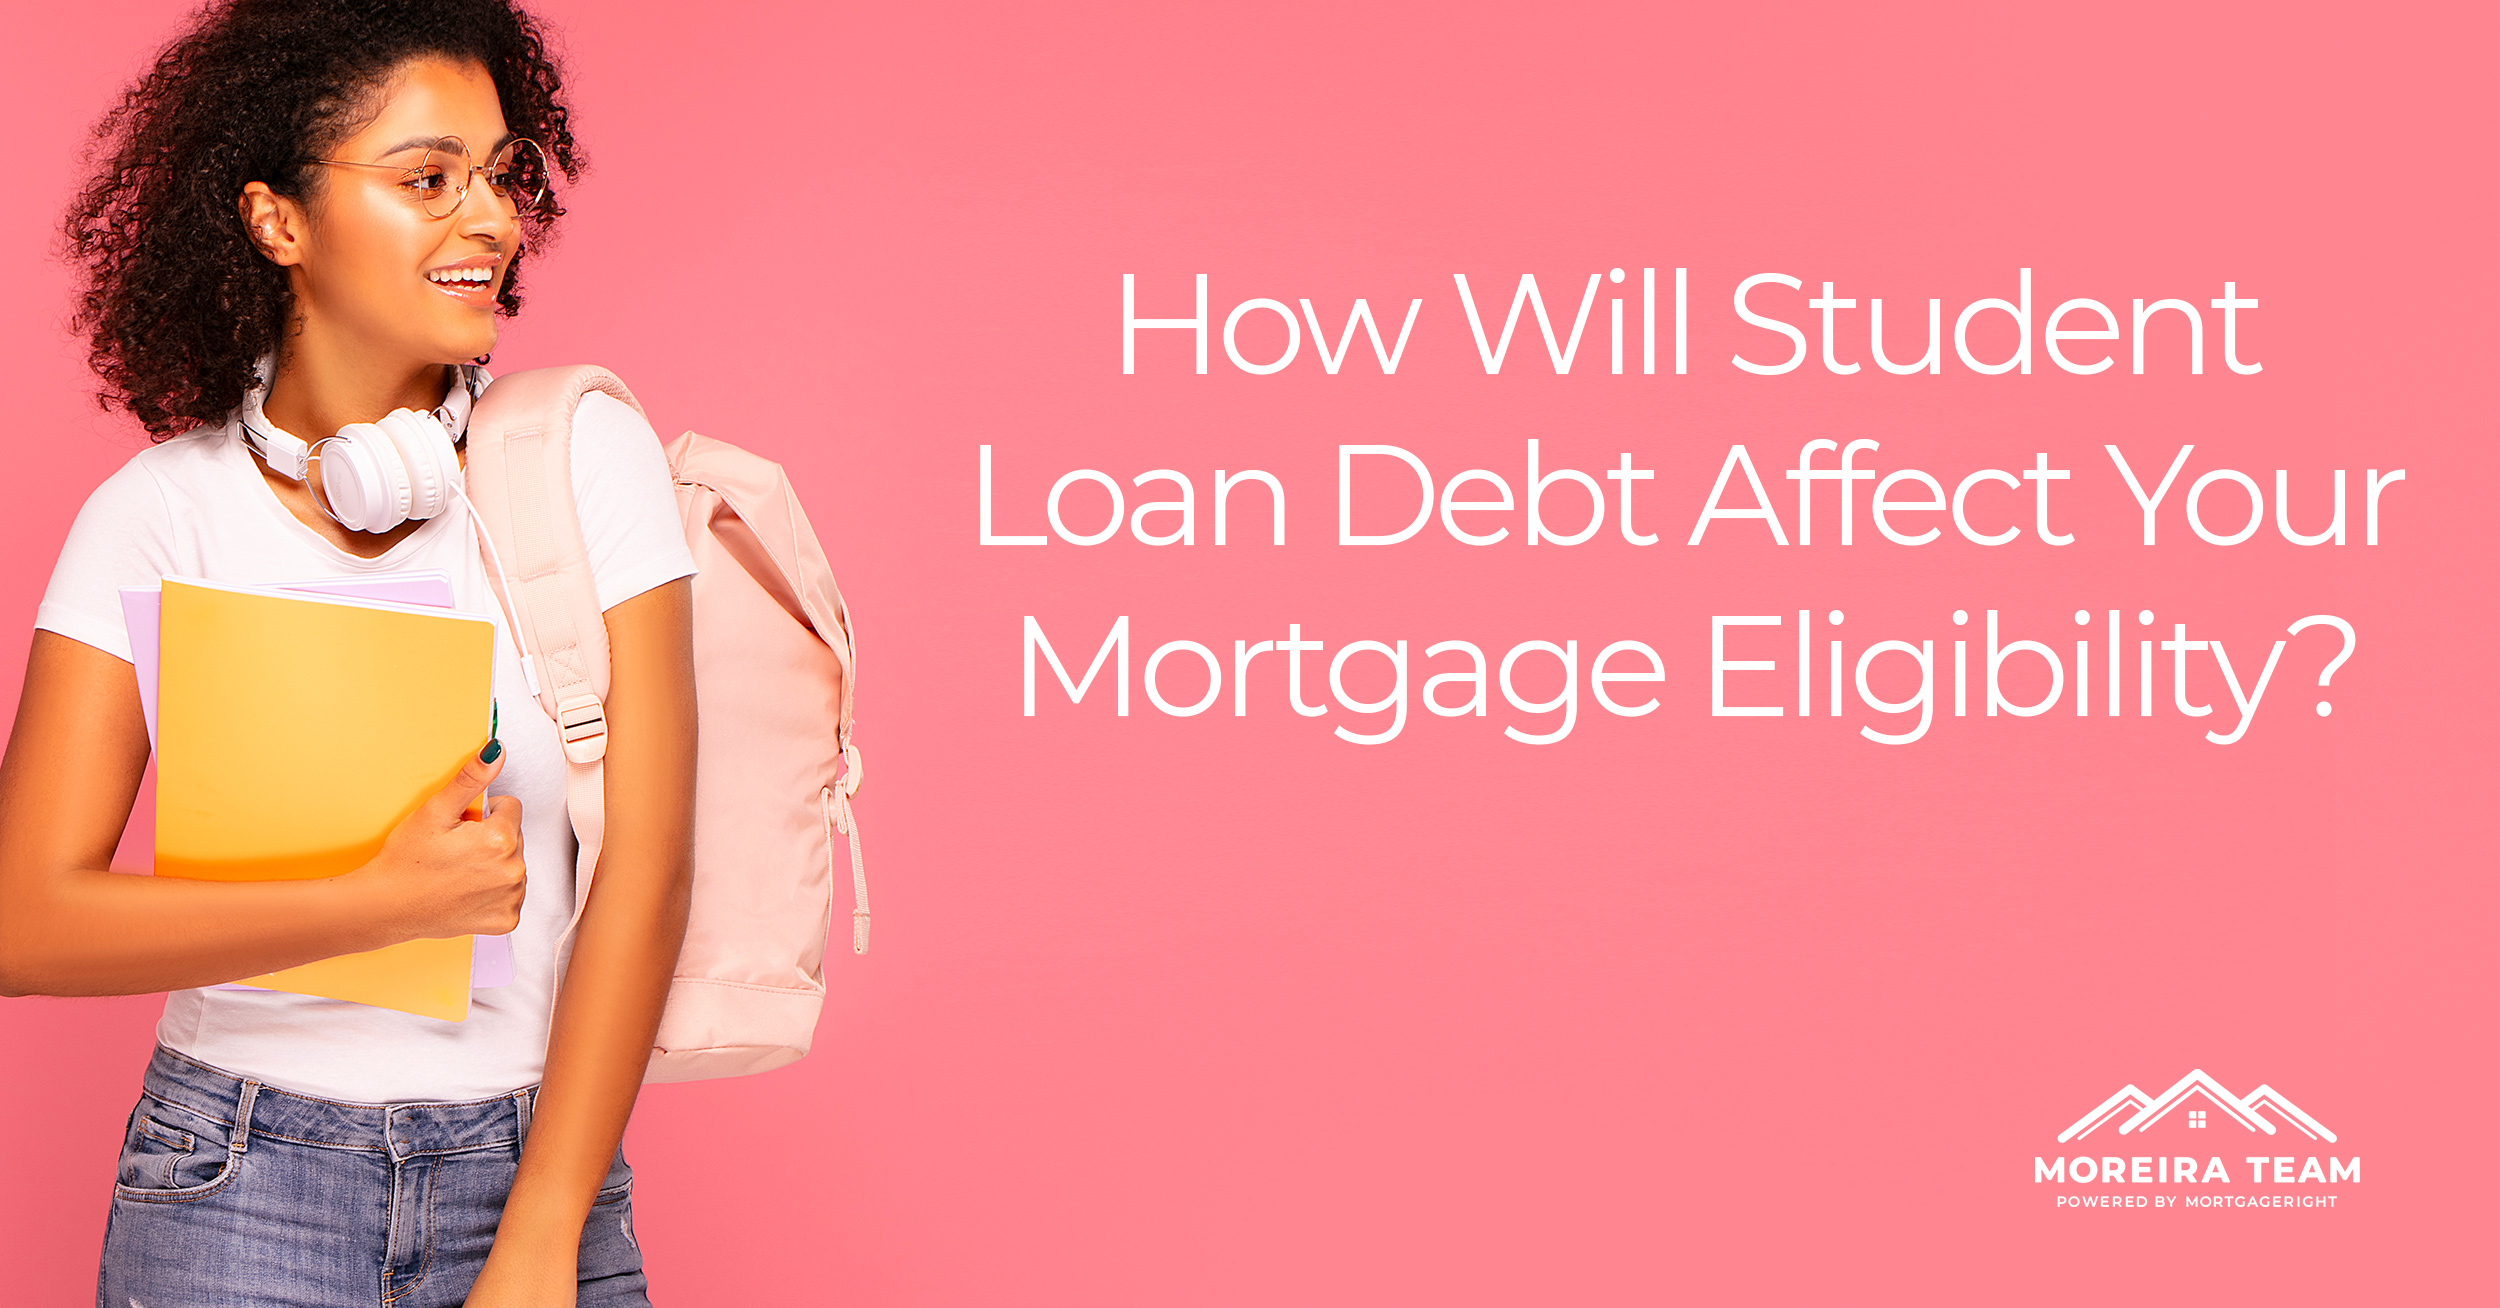 How Will Student Loan Debt Affect Your Mortgage Eligibility?